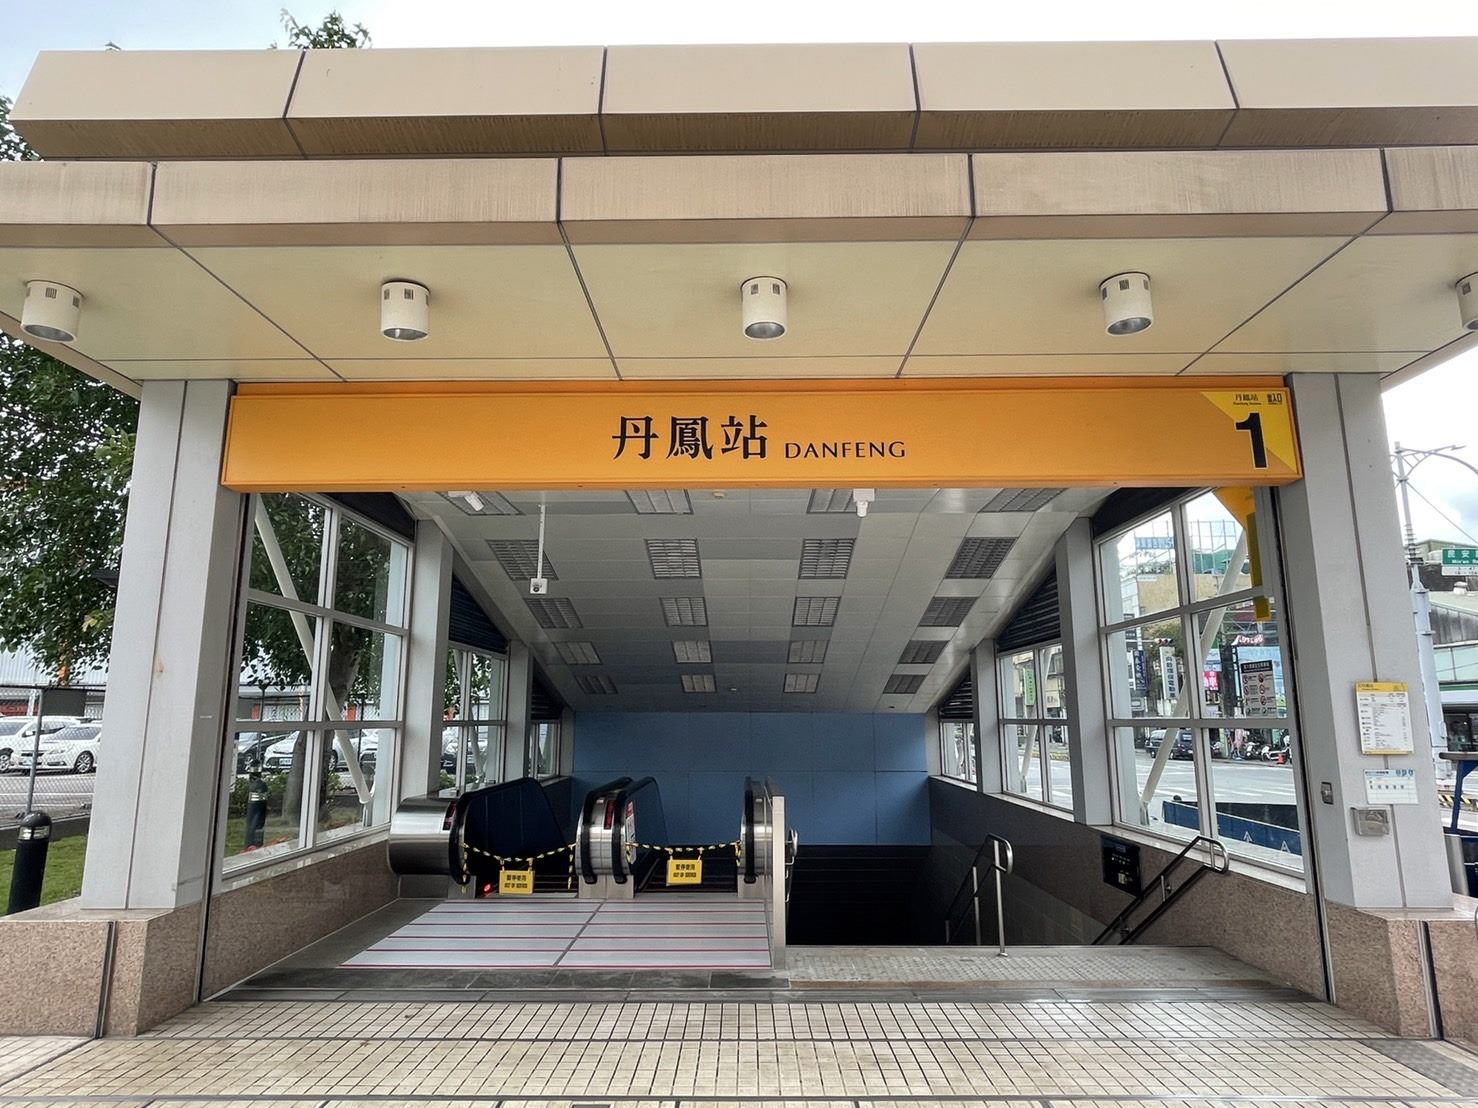 Exit 1 of MRT Danfeng Station